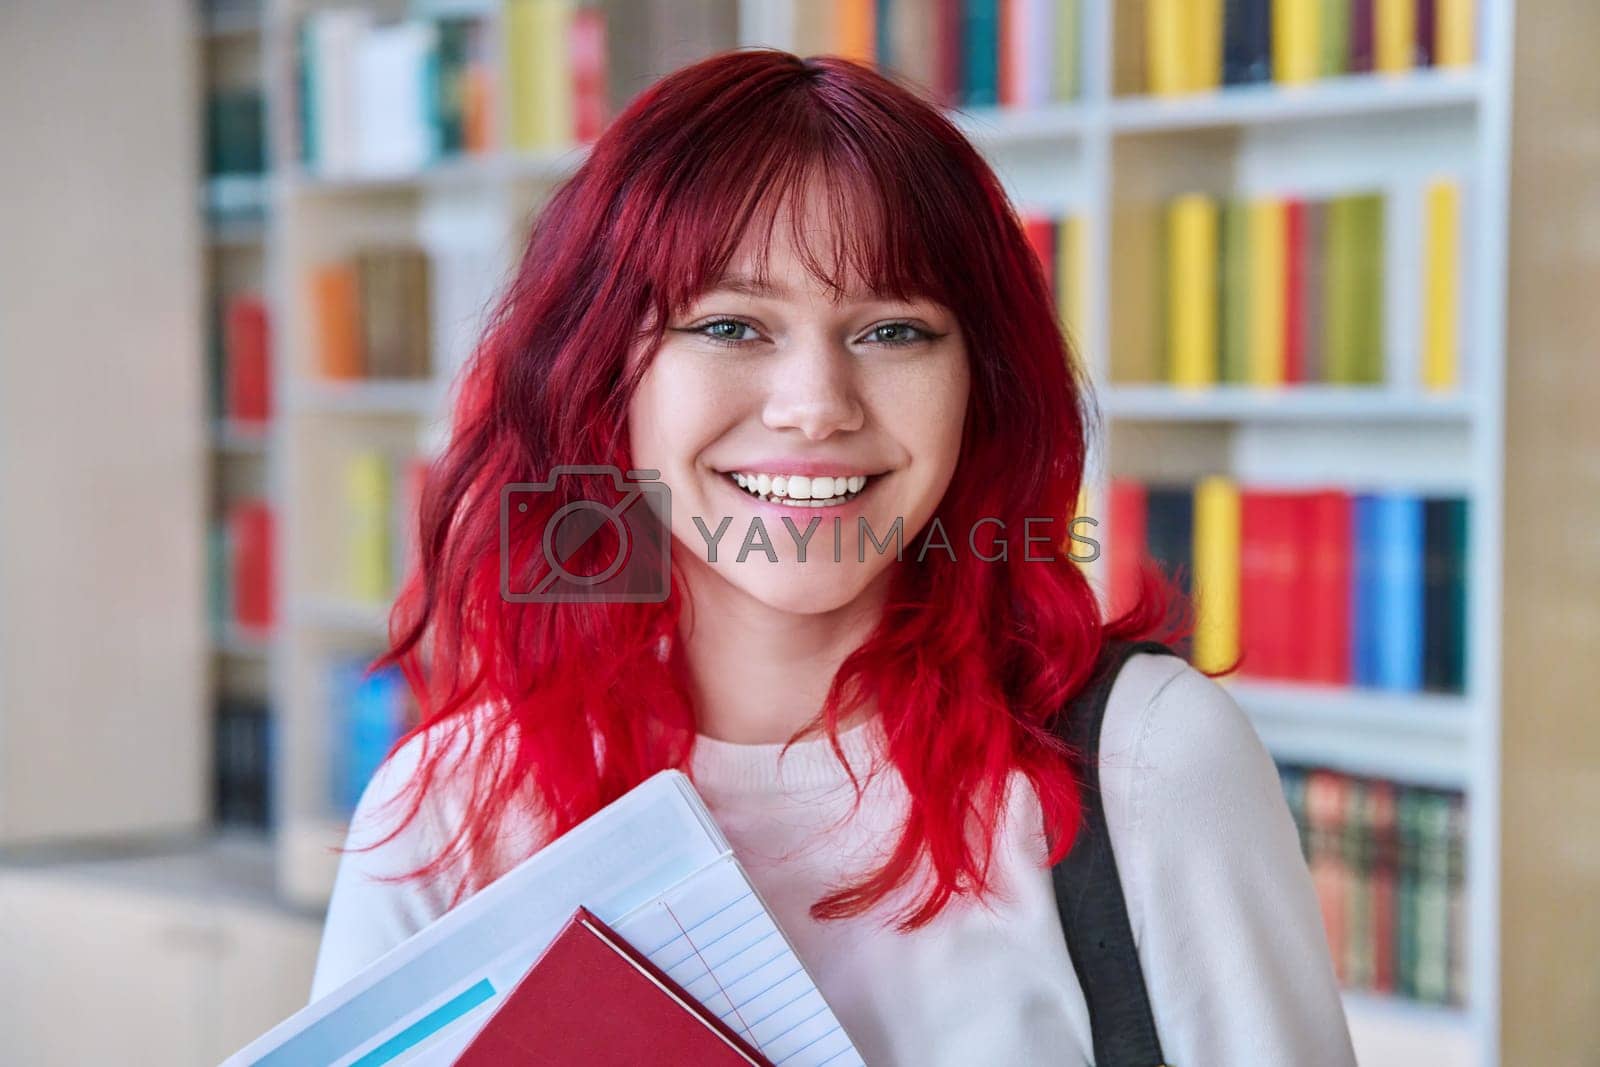 Royalty free image of Portrait of teenage female student looking at camera in library by VH-studio